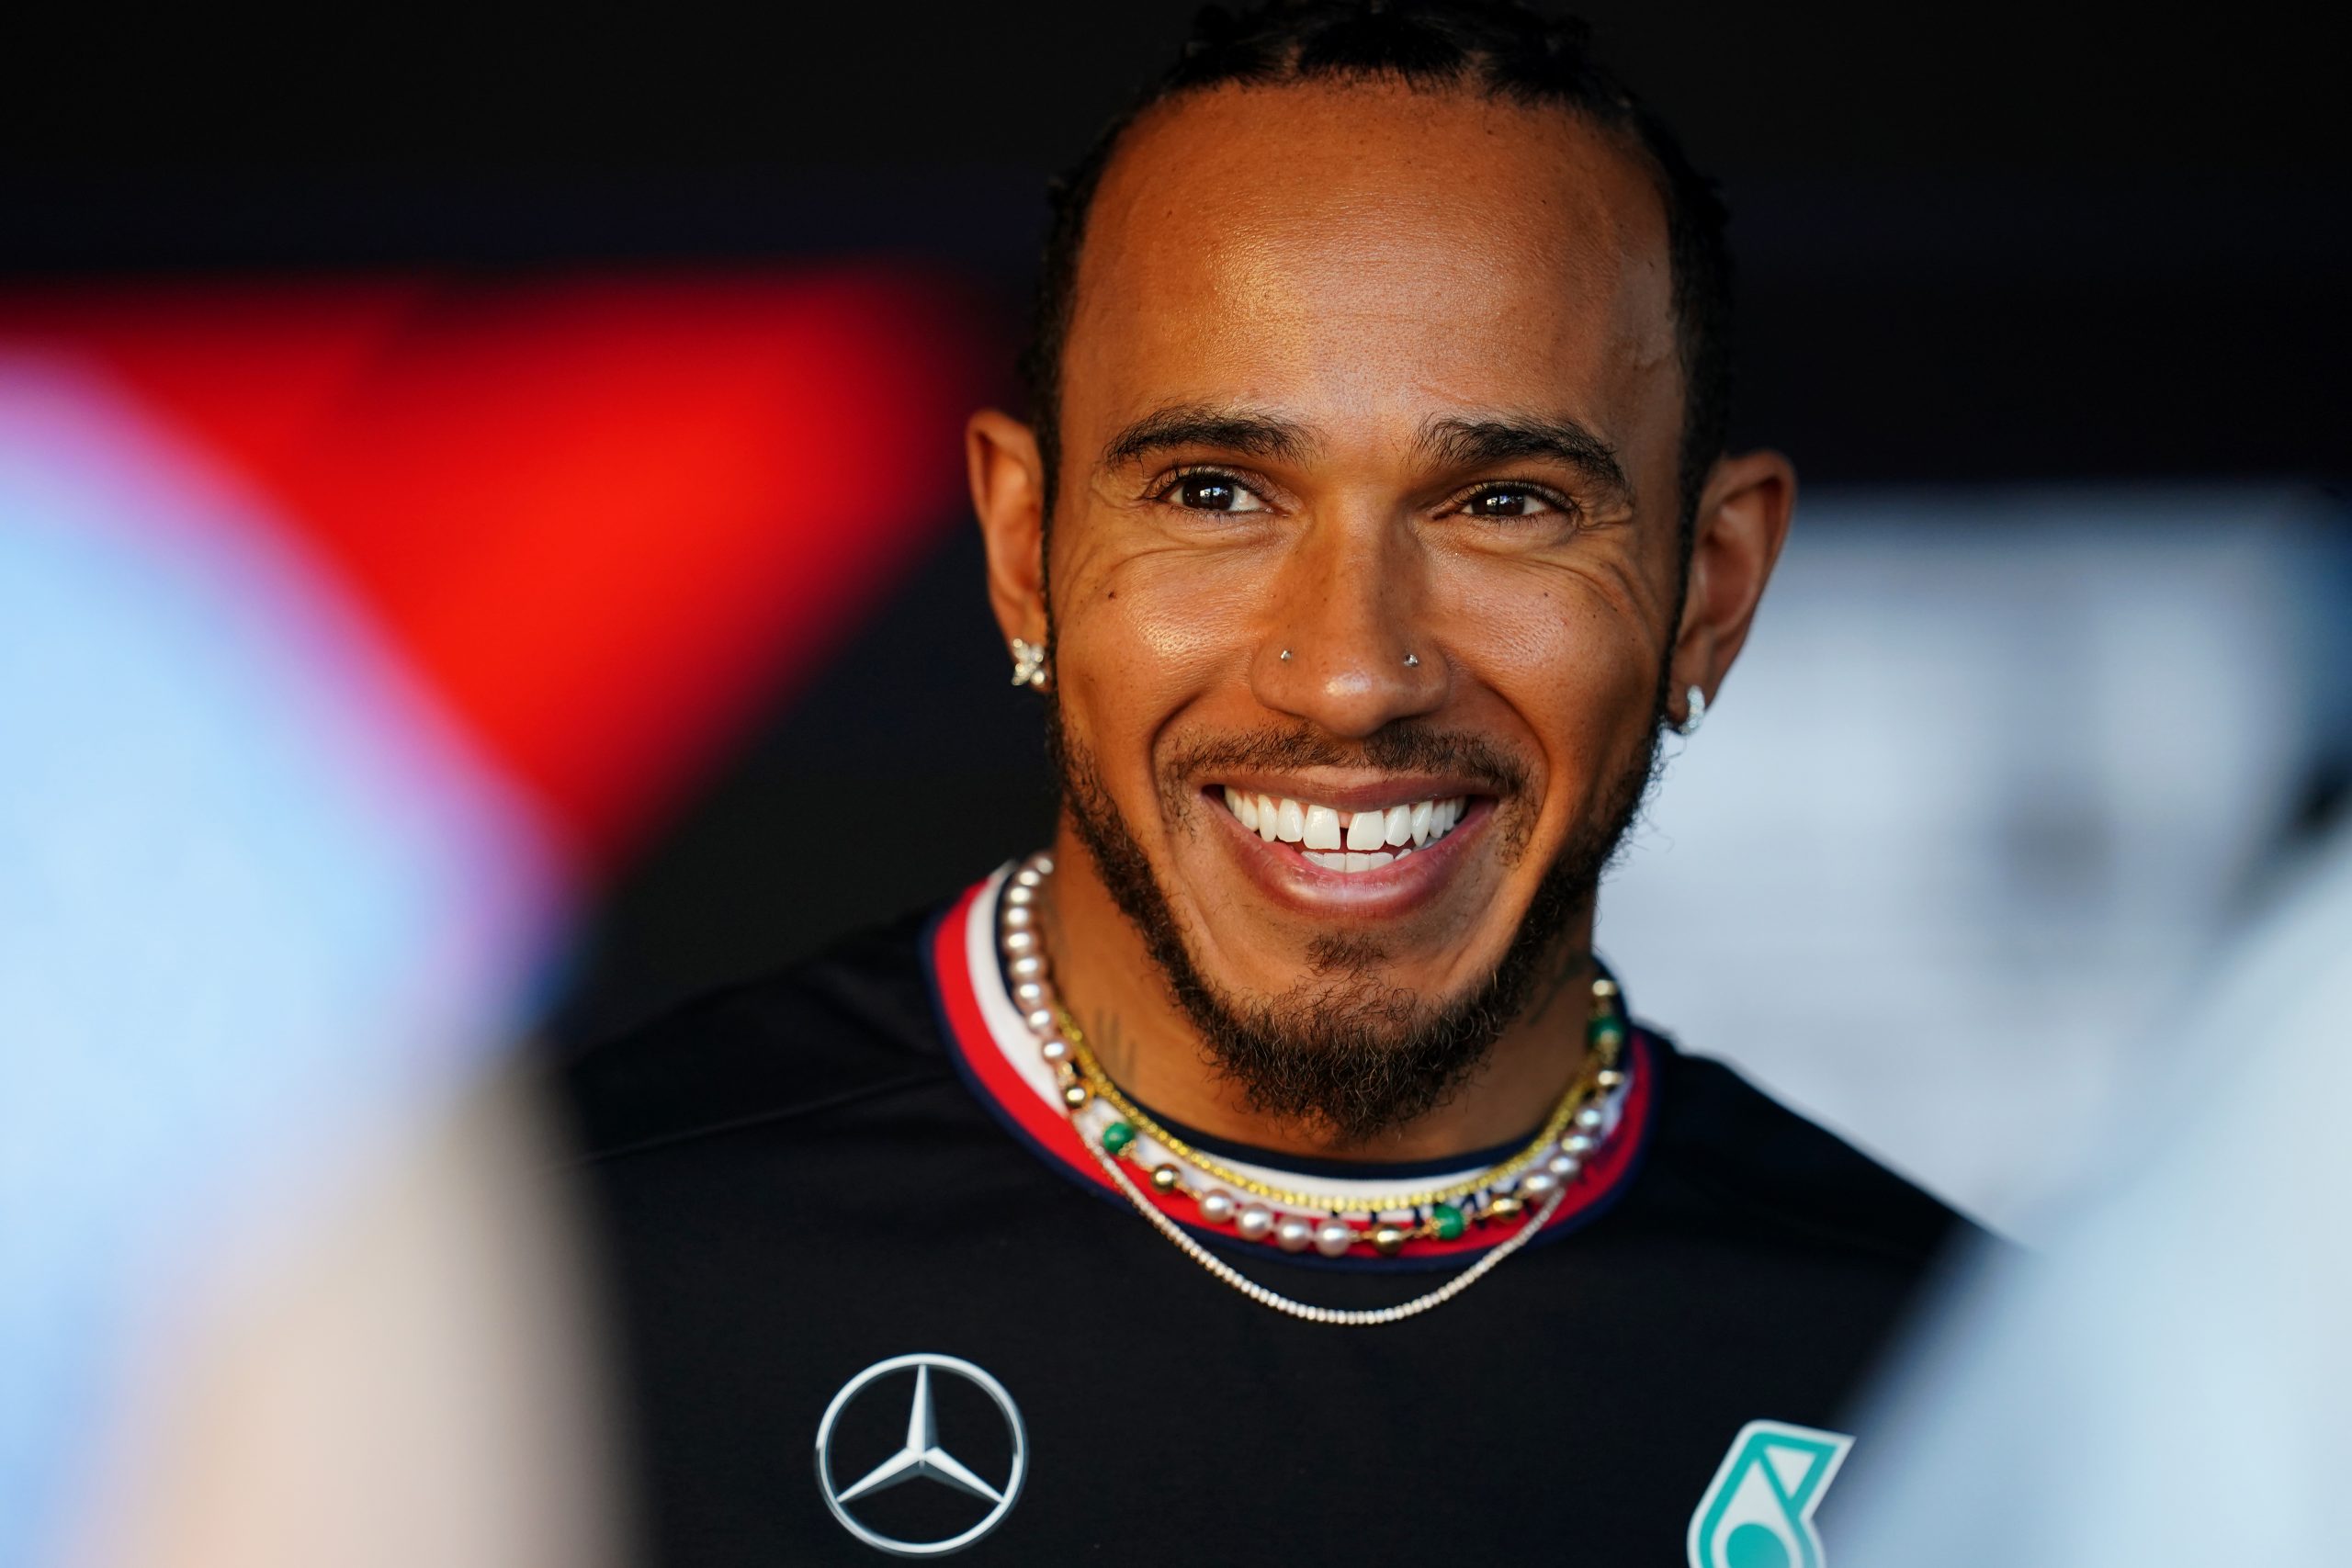 ‘Happy’ Lewis Hamilton still hungry for record eighth world title – Damon Hill